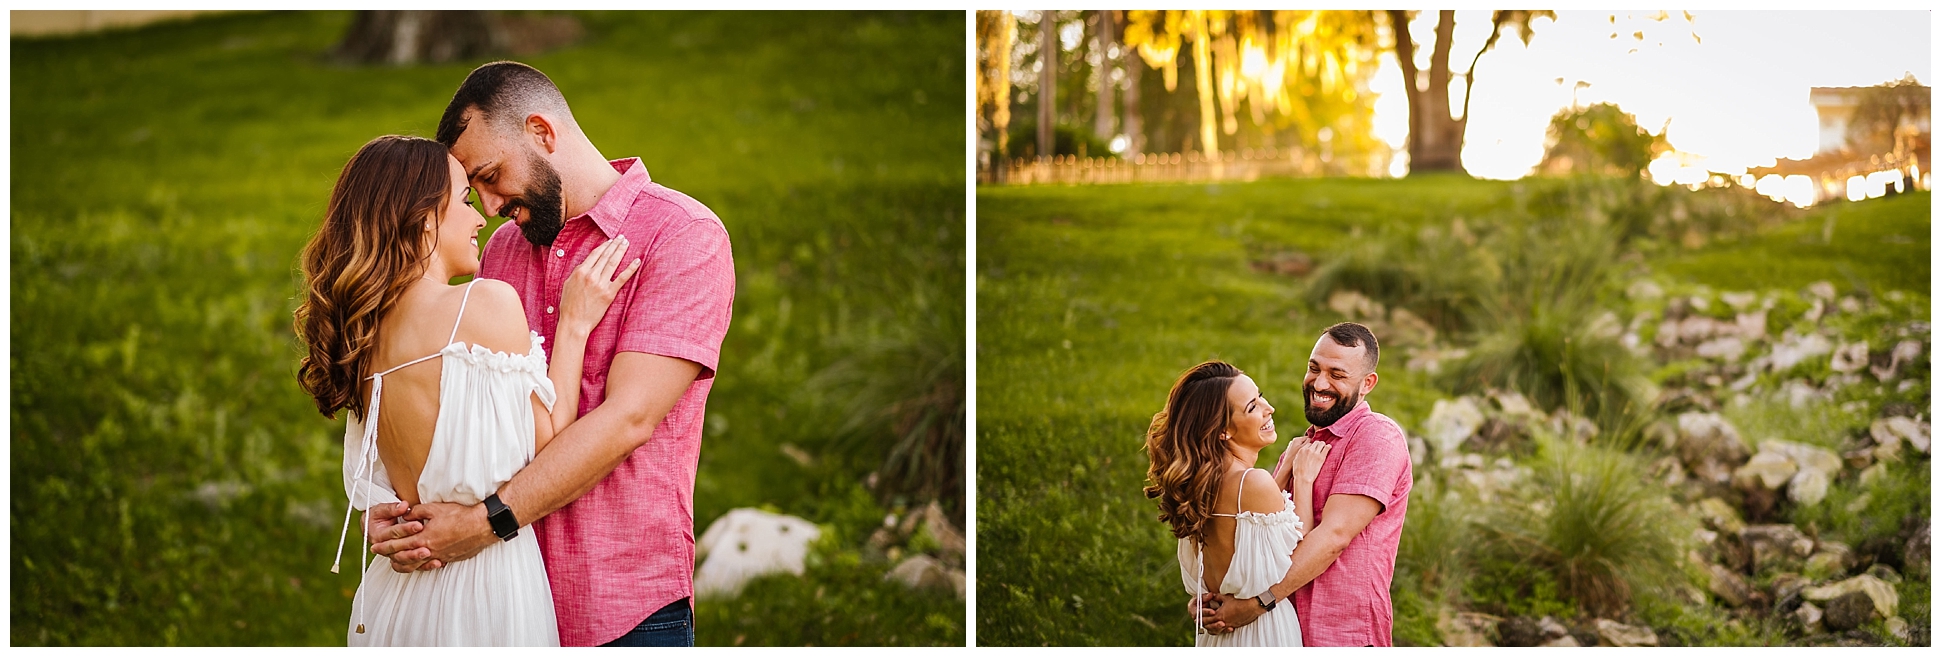 Tampa-sunset-horse-engagement session_0051.jpg